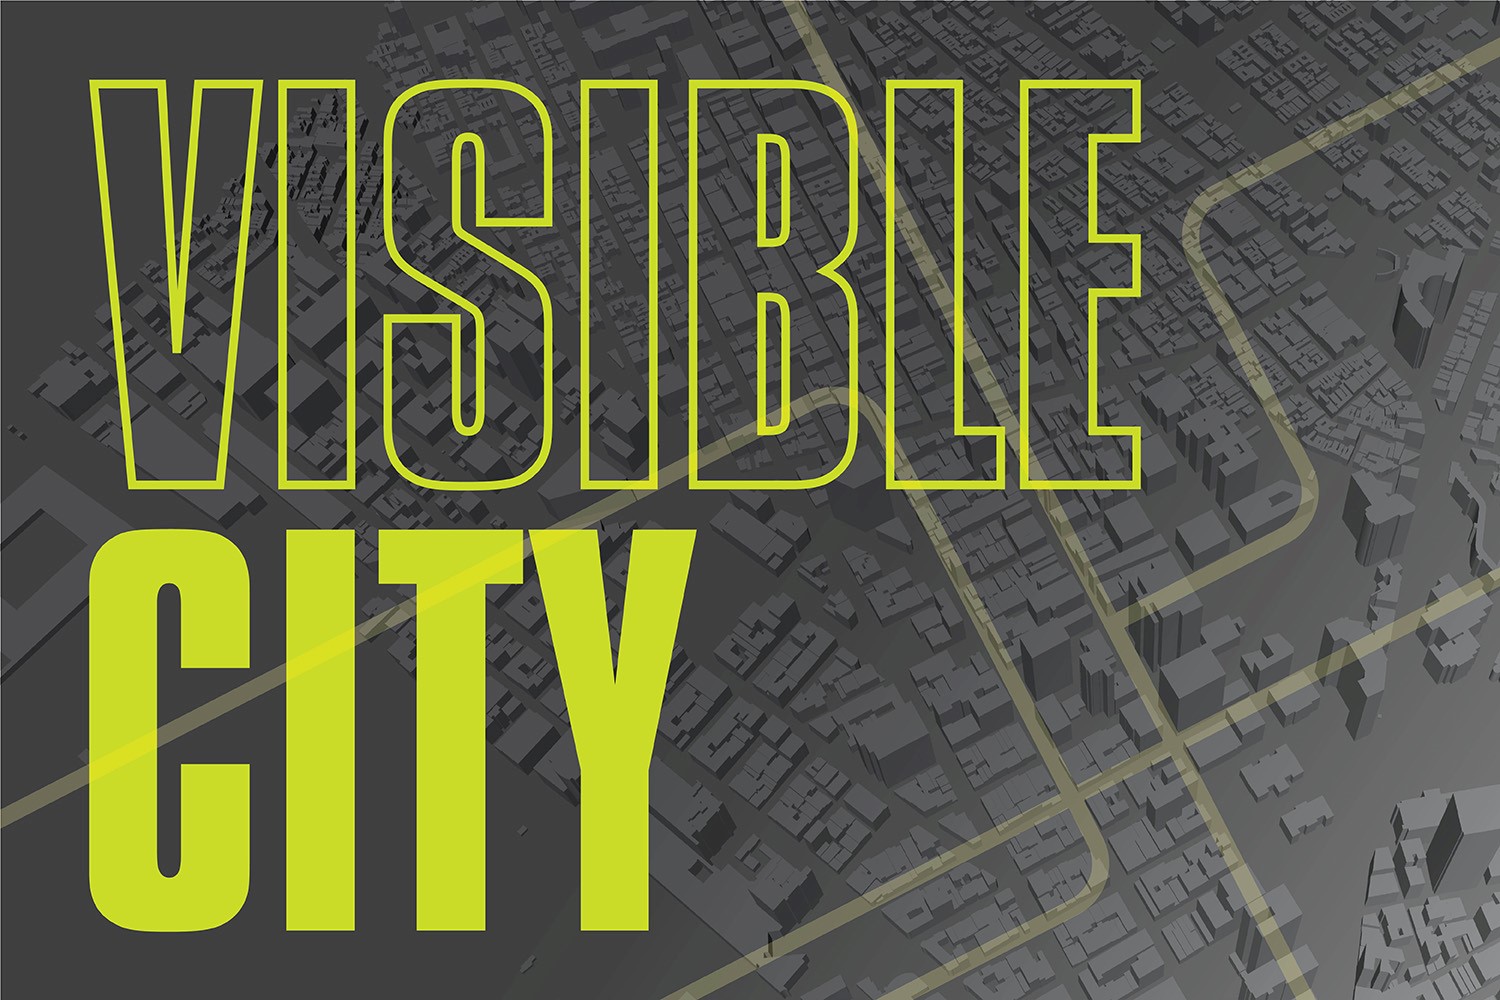 Visible City. Image by: AIANY Transportation and Infrastructure Committee